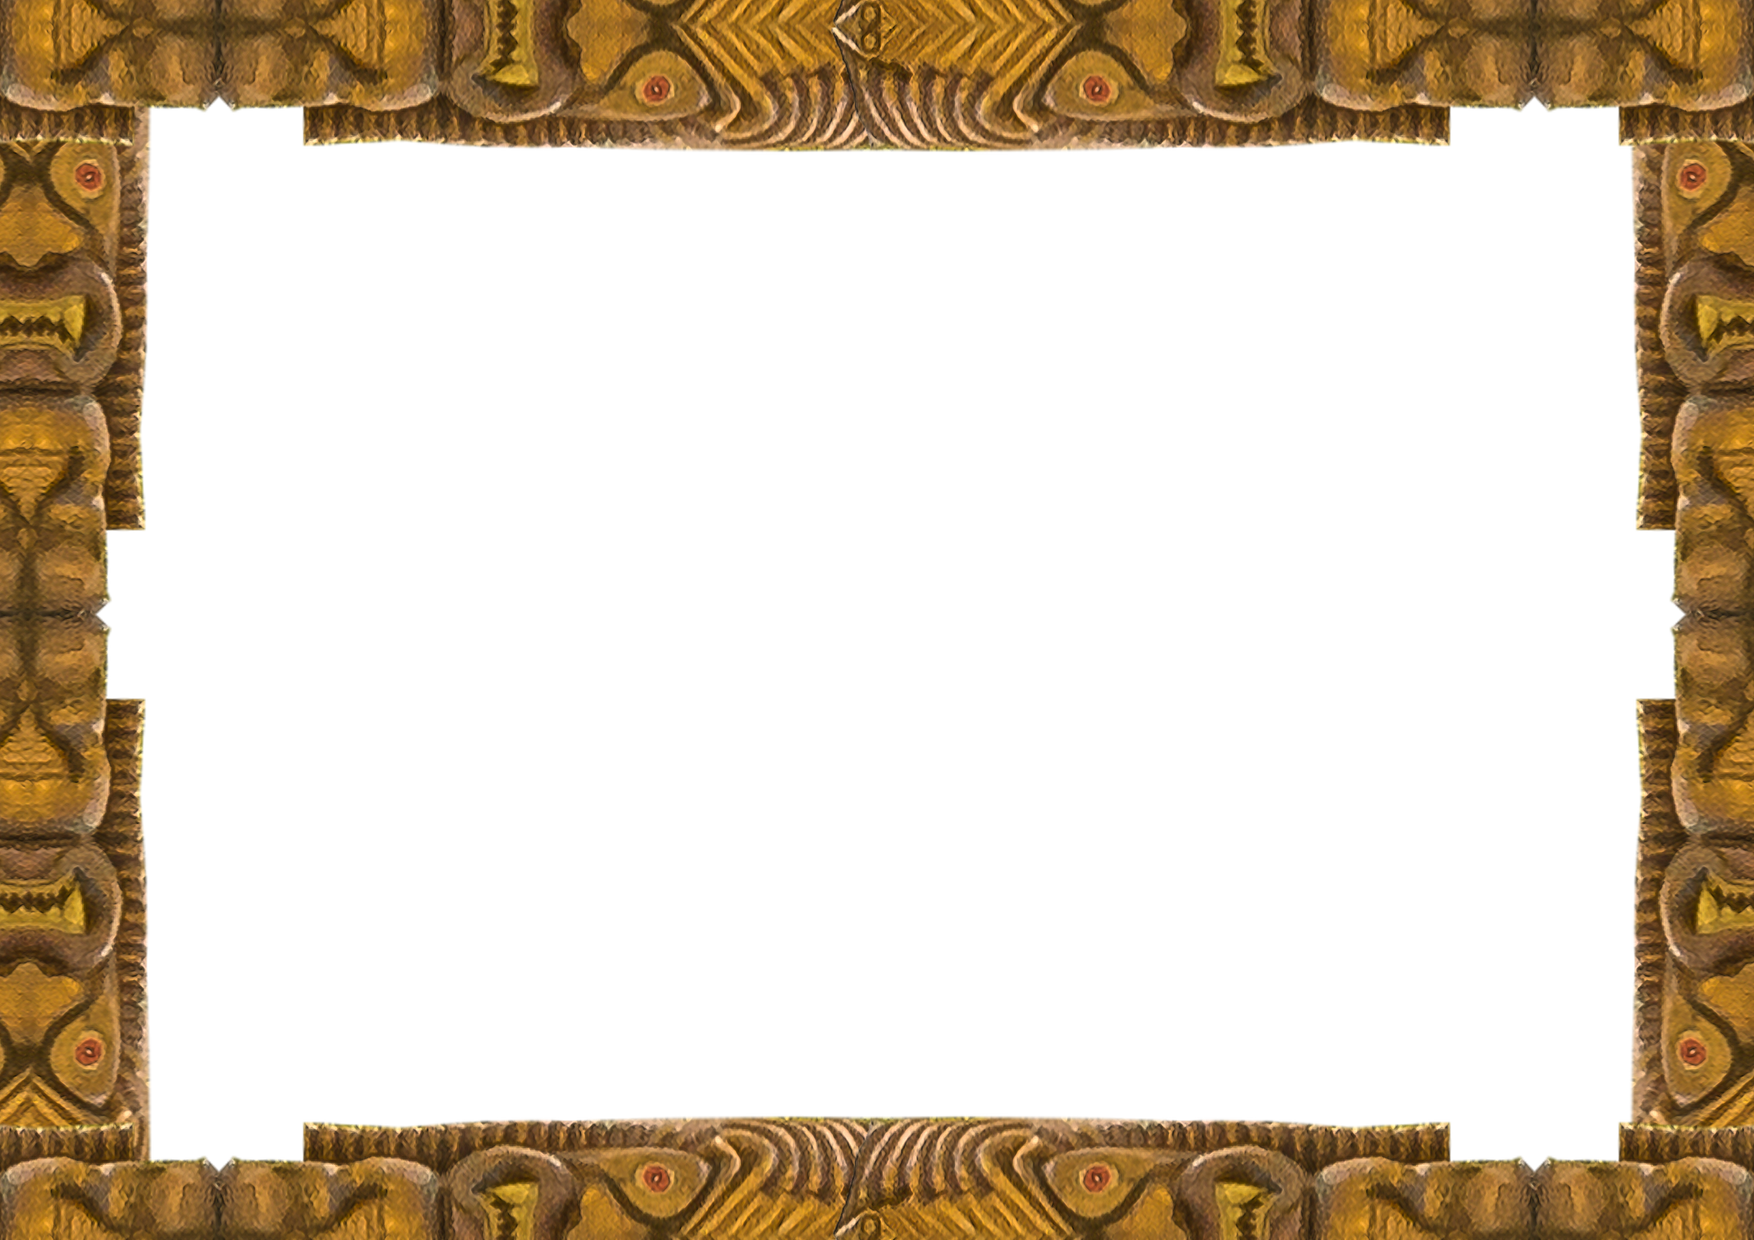 White Frame with Decorated Tribal Borders